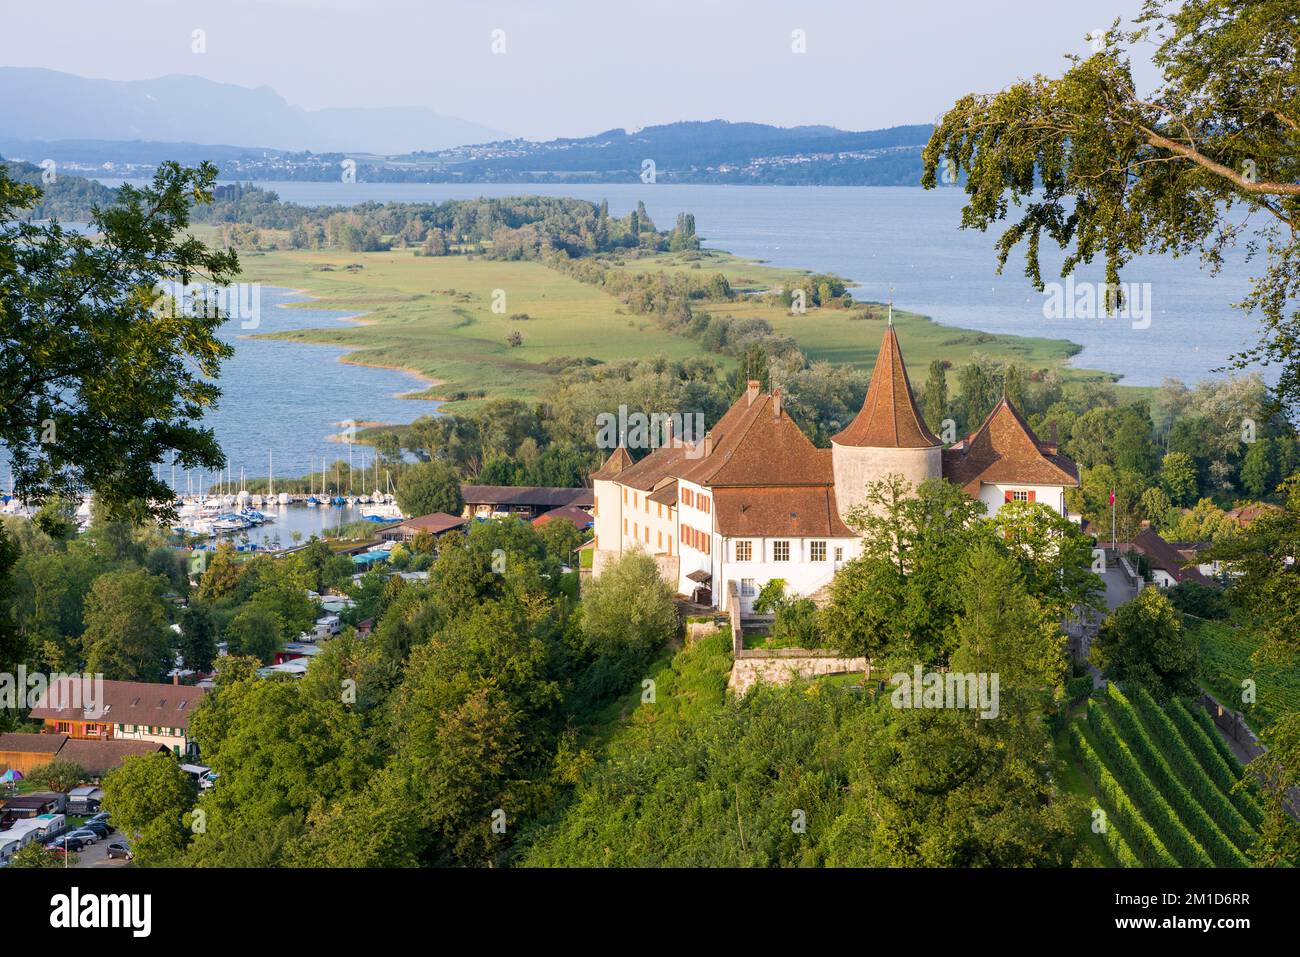 The Erlach Castle is located on a hill and surrounded by wine yards, overlooking the Lake Biel and the St. Peter peninsula Stock Photo